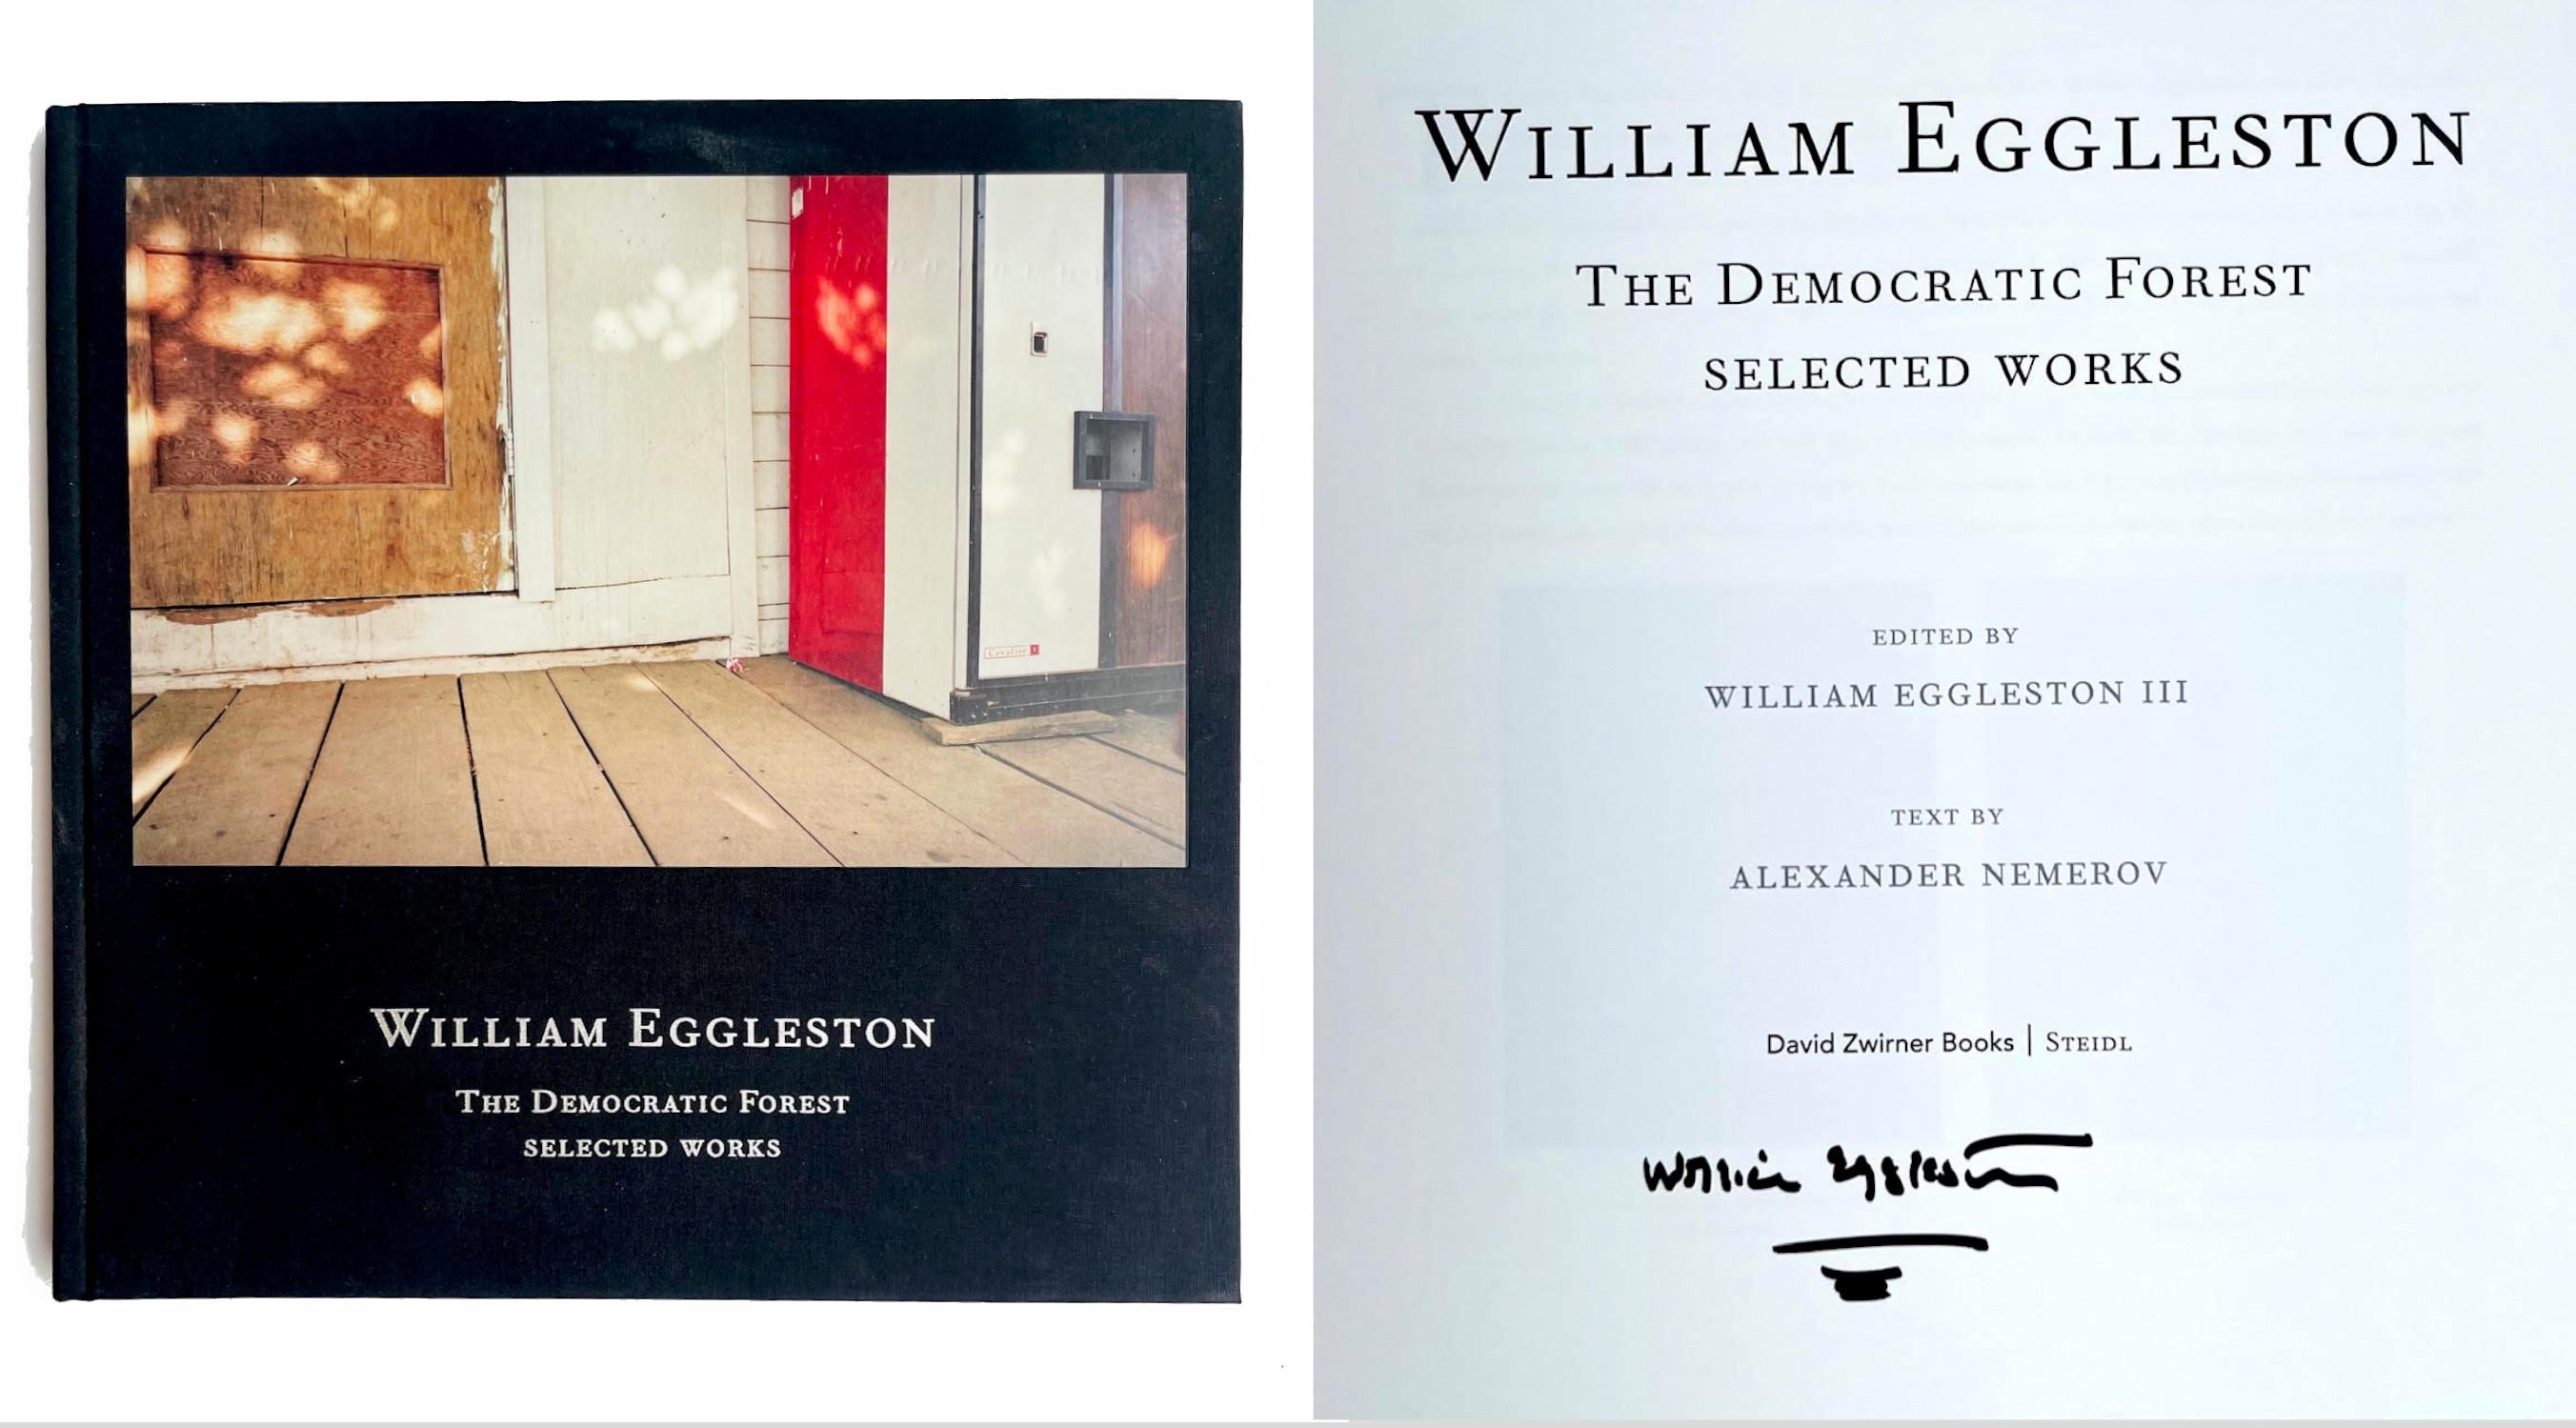 William Eggleston
William Eggleston The Democratic Forest Selected Works (Hand signed), 2016
Hardback monograph with dust jacket
Hand signed by William Eggleston for the present owner
12 × 12 1/2 × 1/2 inches
Provenance: Signed for the present owner